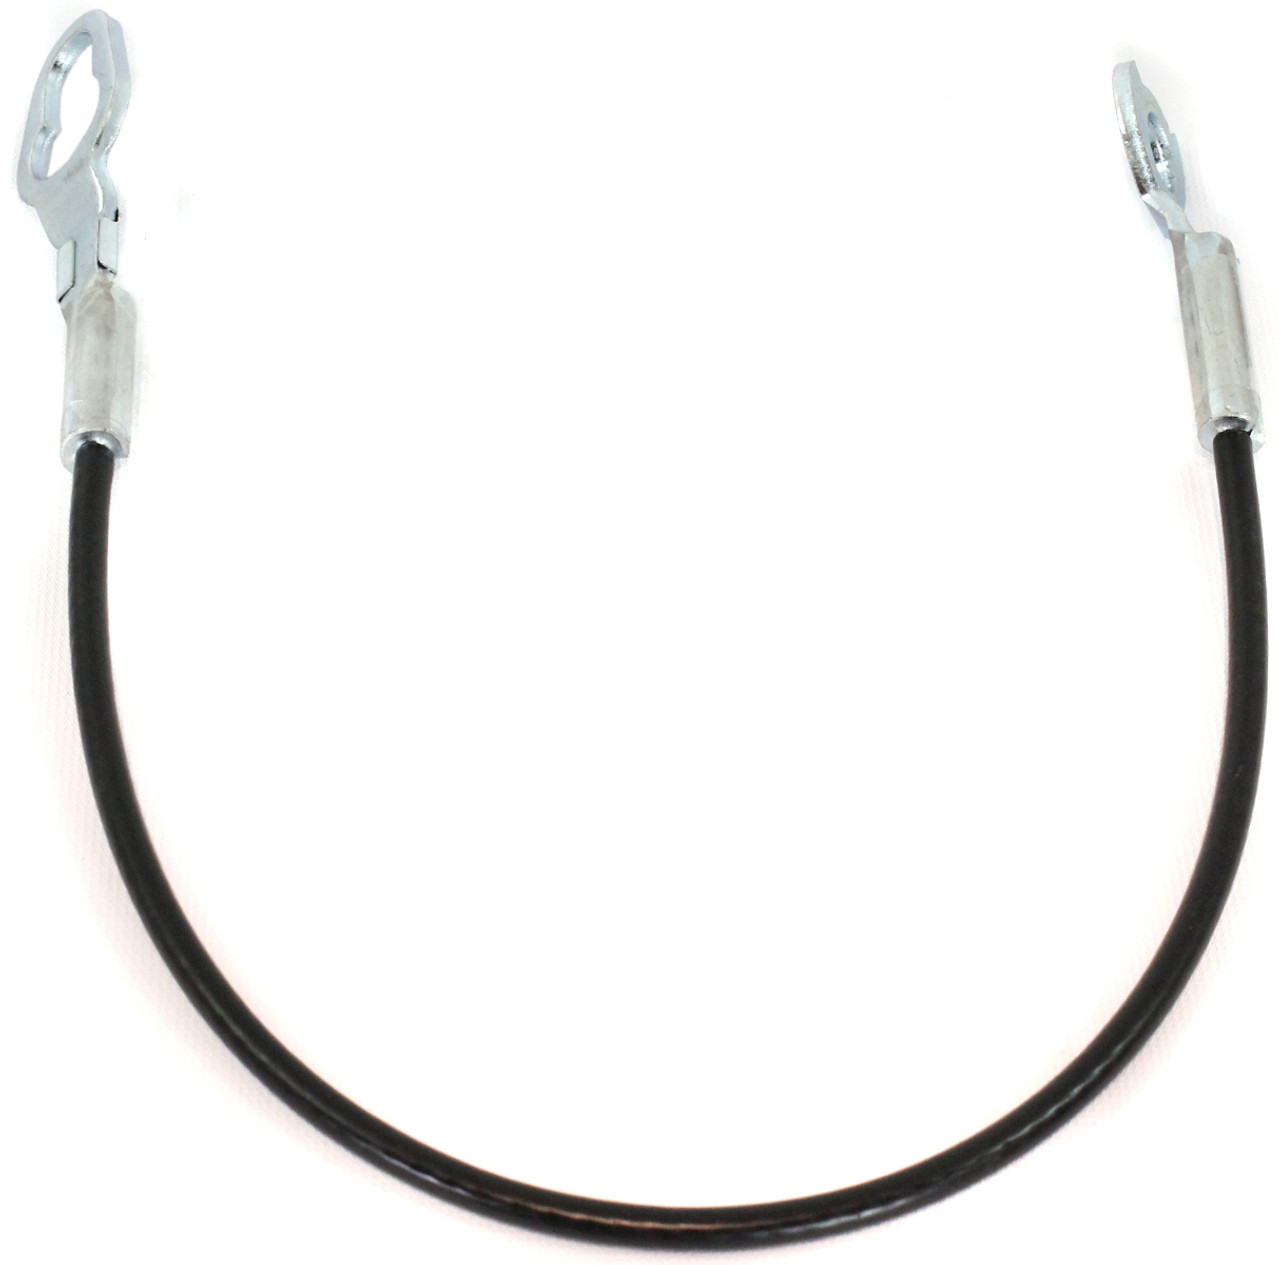 RAM 1500 02-18/2500/3005 03-18 TAILGATE CABLE RH=LH, Includes 19-22 1500 Classic